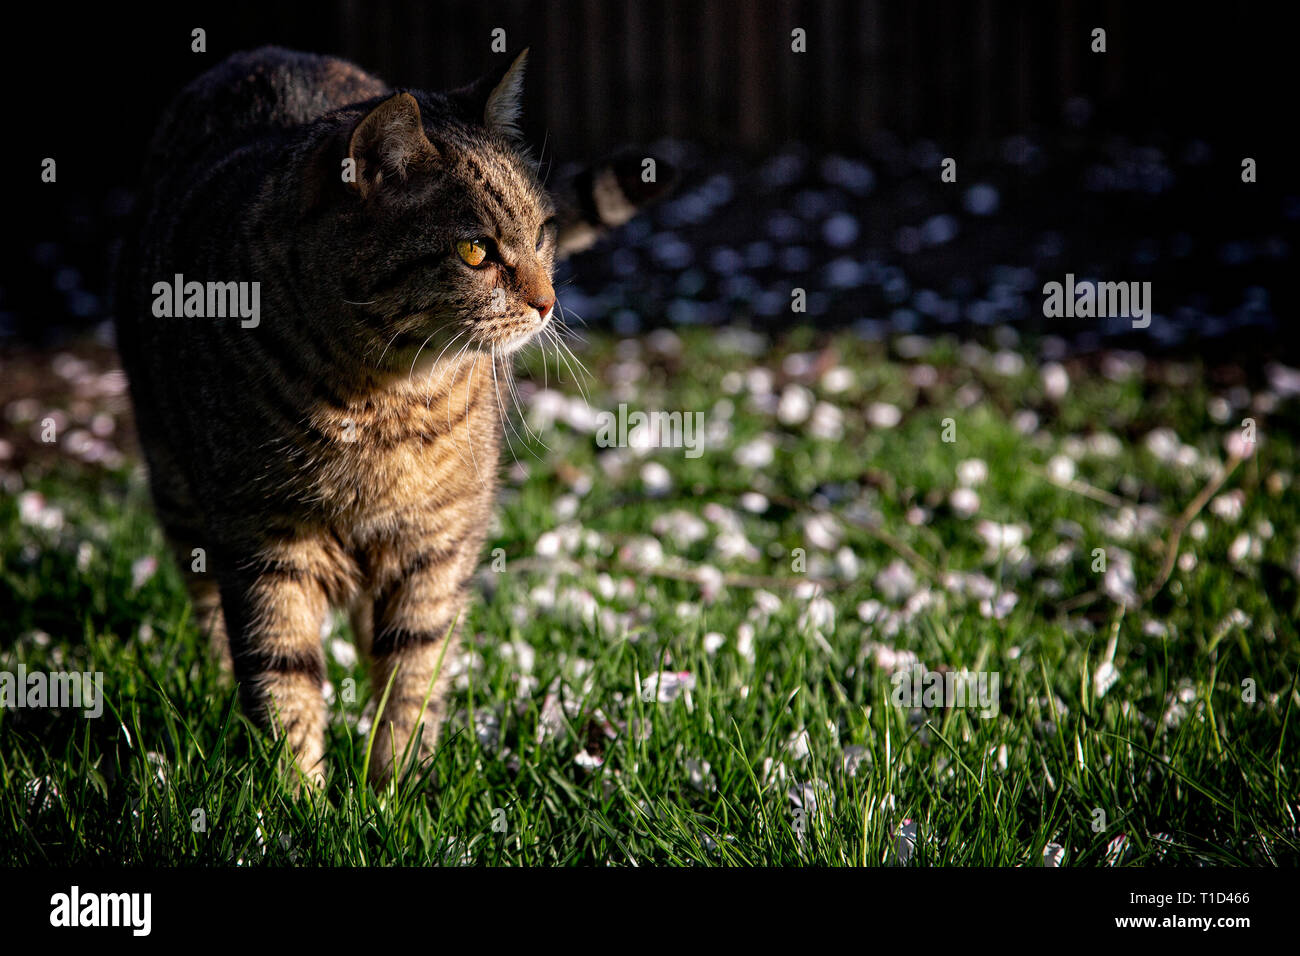 Soriano european cat relaxing outdoor first spring days Stock Photo